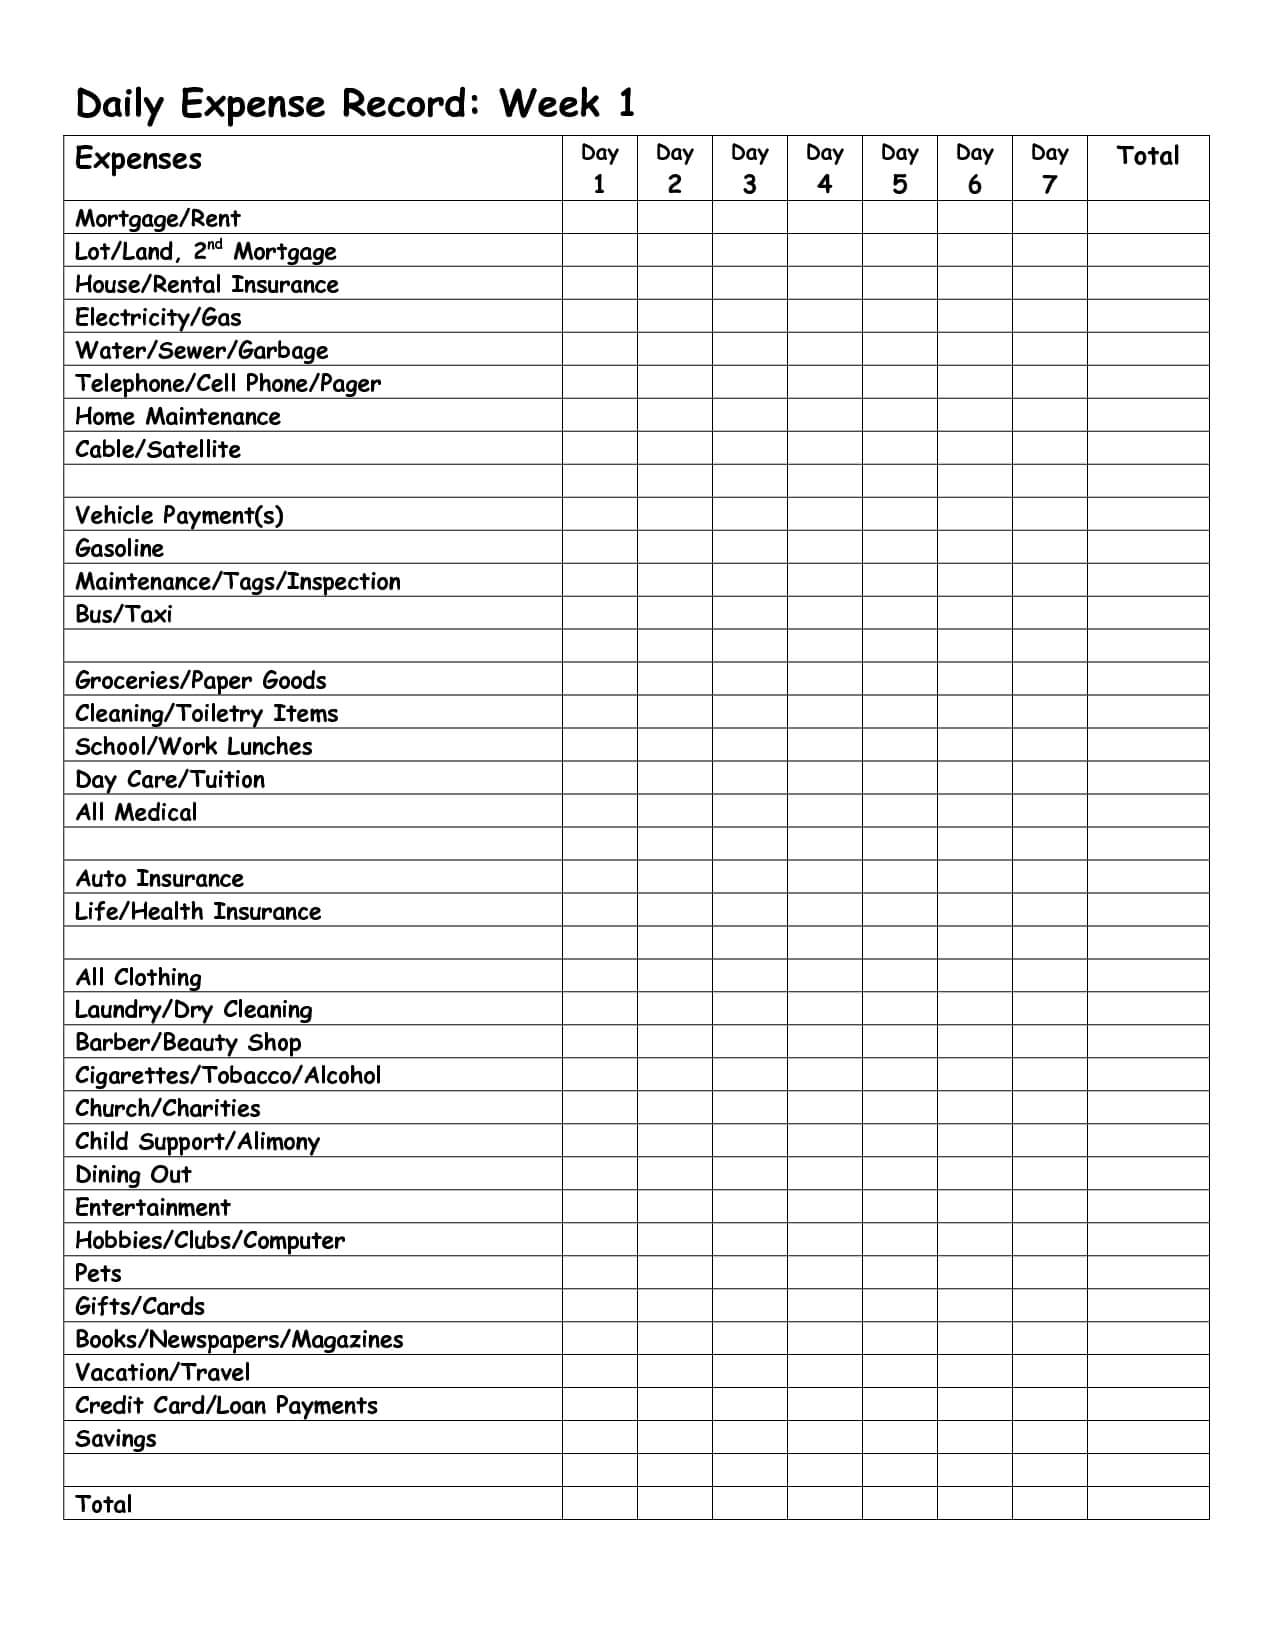 Monthly Expense Report Template | Daily Expense Record Week With Regard To Pest Control Report Template